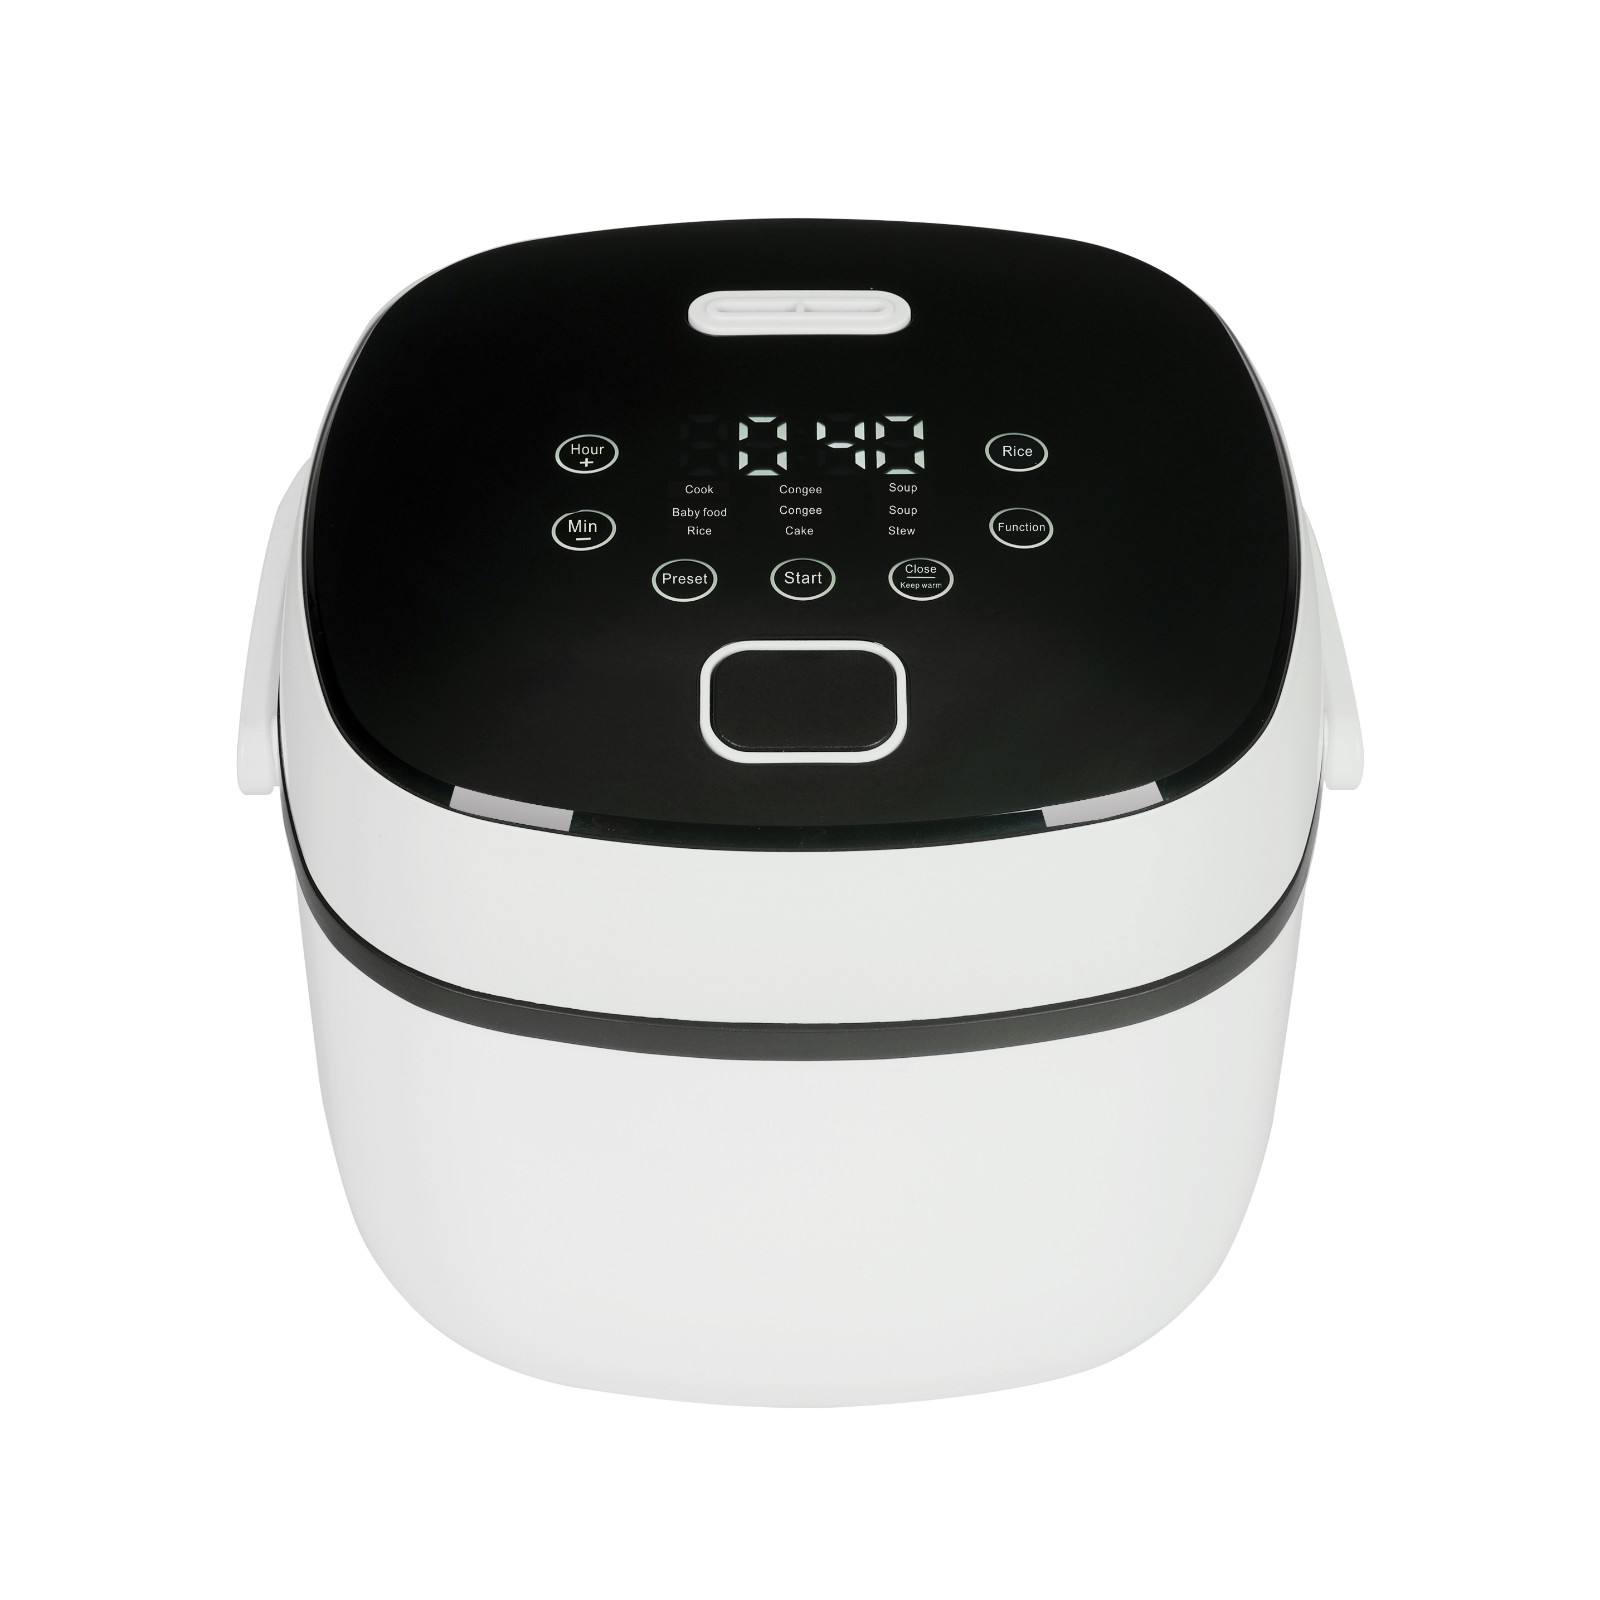 Touch control rice cooker